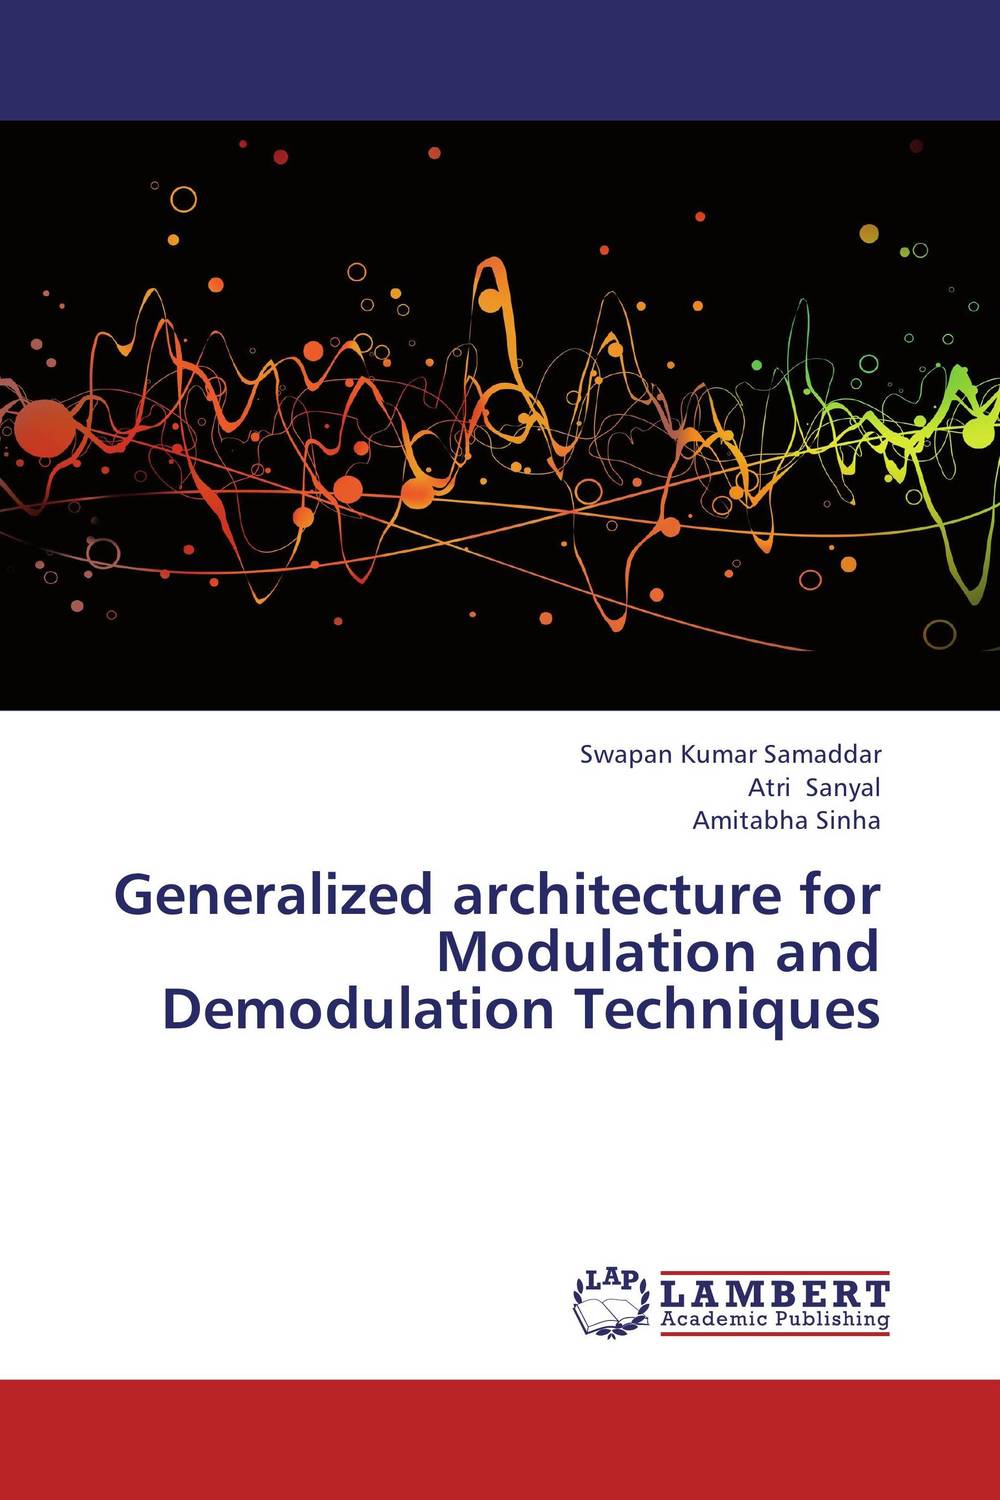 Generalized architecture for Modulation and Demodulation Techniques